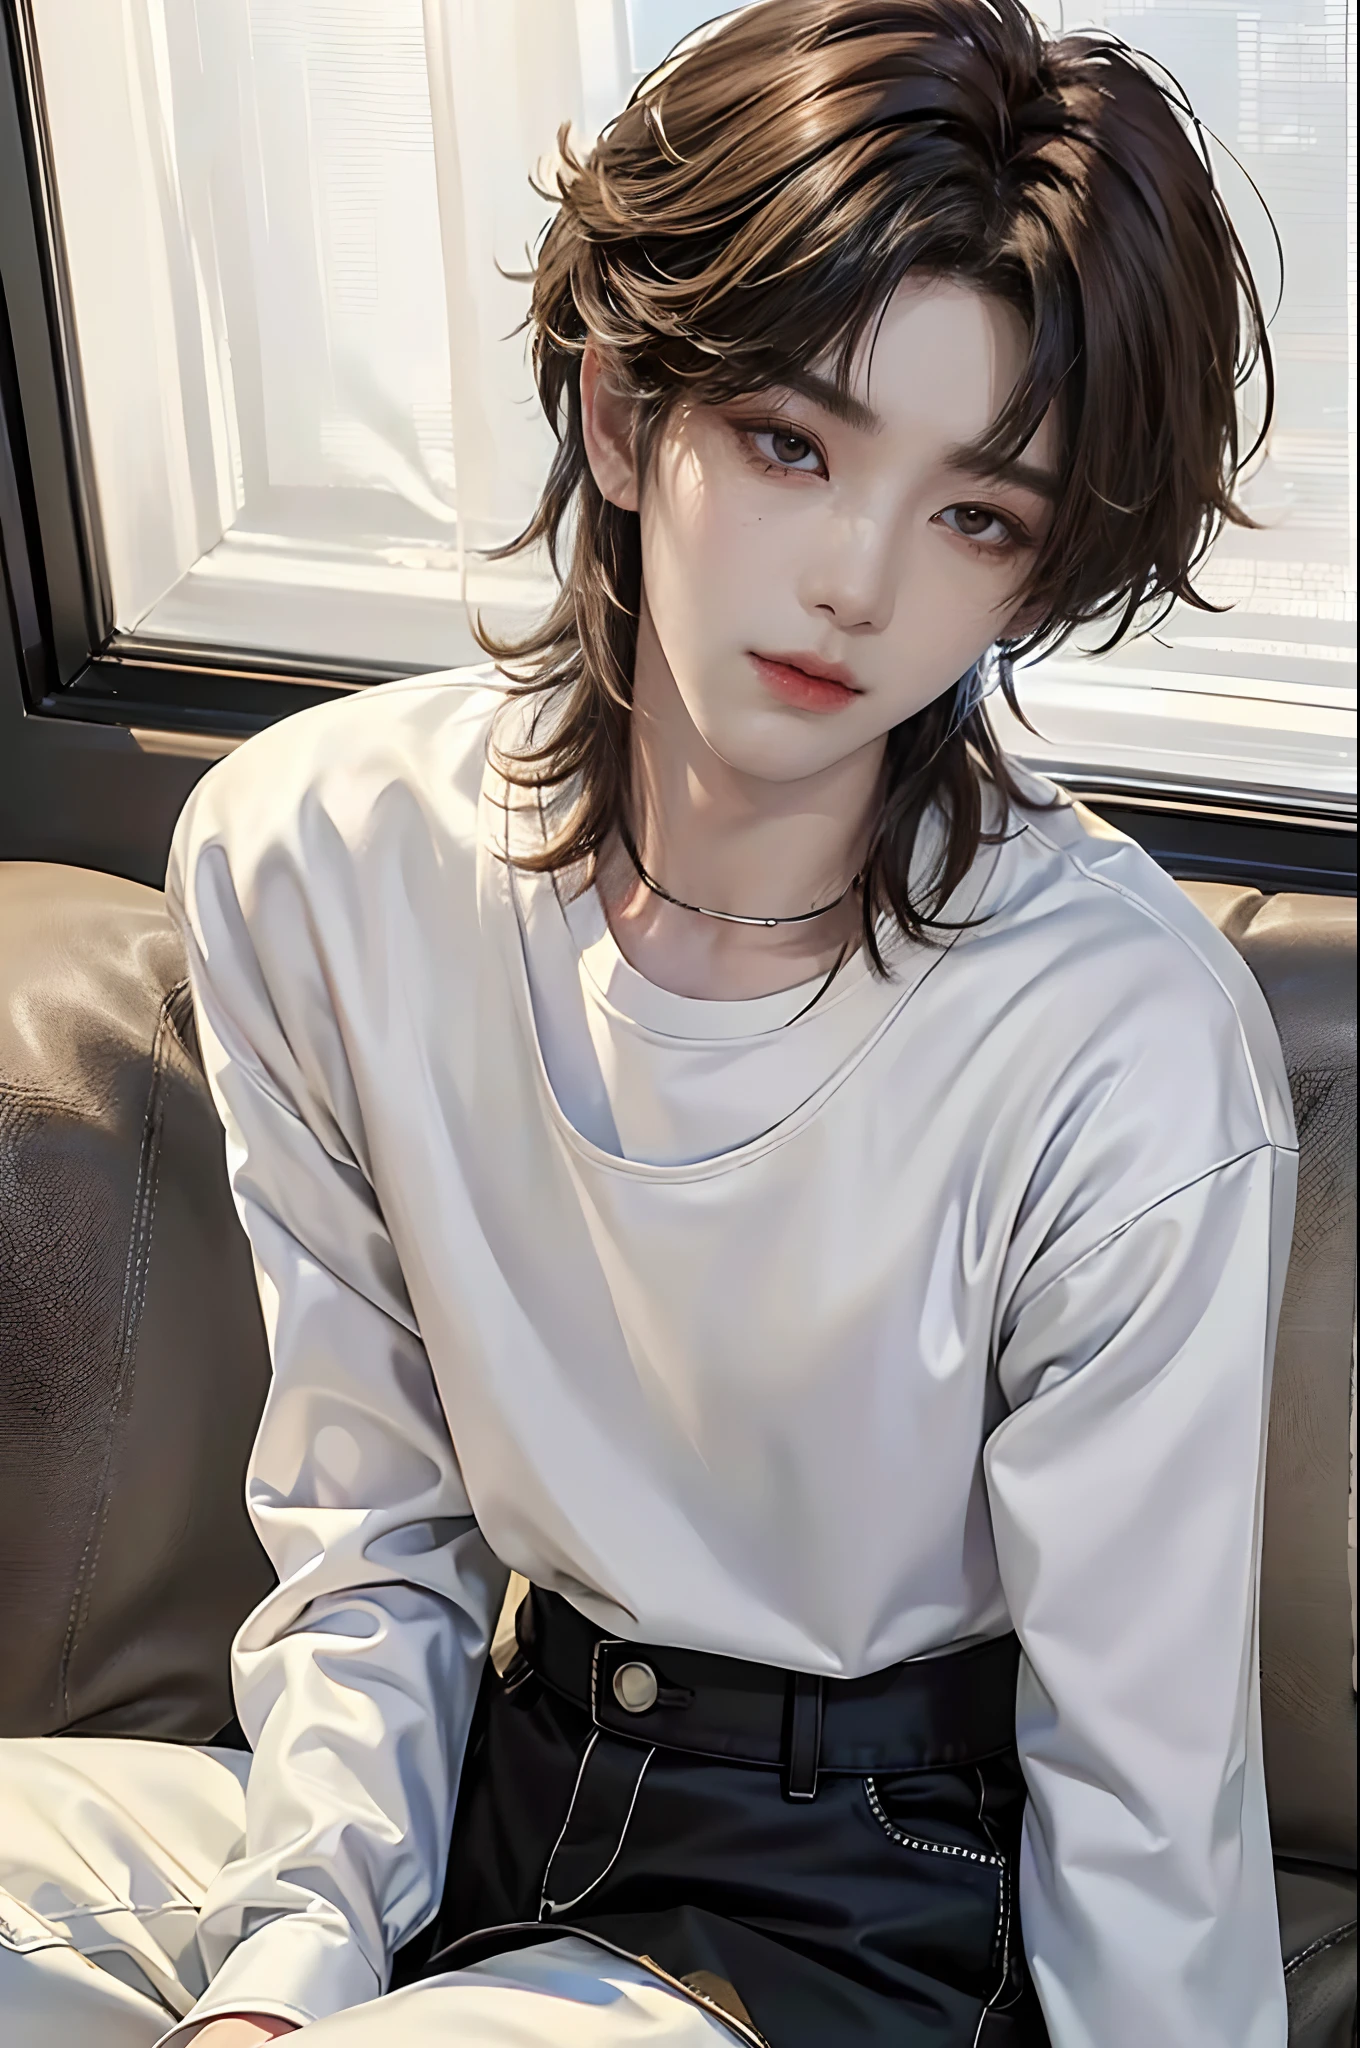 ​masterpiece、（top-quality)、((high-level image quality))、One Manly Boy、Slim body、((White Y-shirt and long black pants))、(Detailed beautiful eyes)、September Night Road、sitting on a curb、Face similar to Chaewon in Ruseraphim、((short hair above the ears))、((Smaller face))、((Neutral face))、((Light brown eyes))、((Korean boy))、((18year old))、((Handsome man))、((Wild look))、((Korean Makeup))、((elongated and sharp eyes))、((Sit next to the viewer))、((shot from a side angle))、((The upper part of the body))、((Close-range shooting))